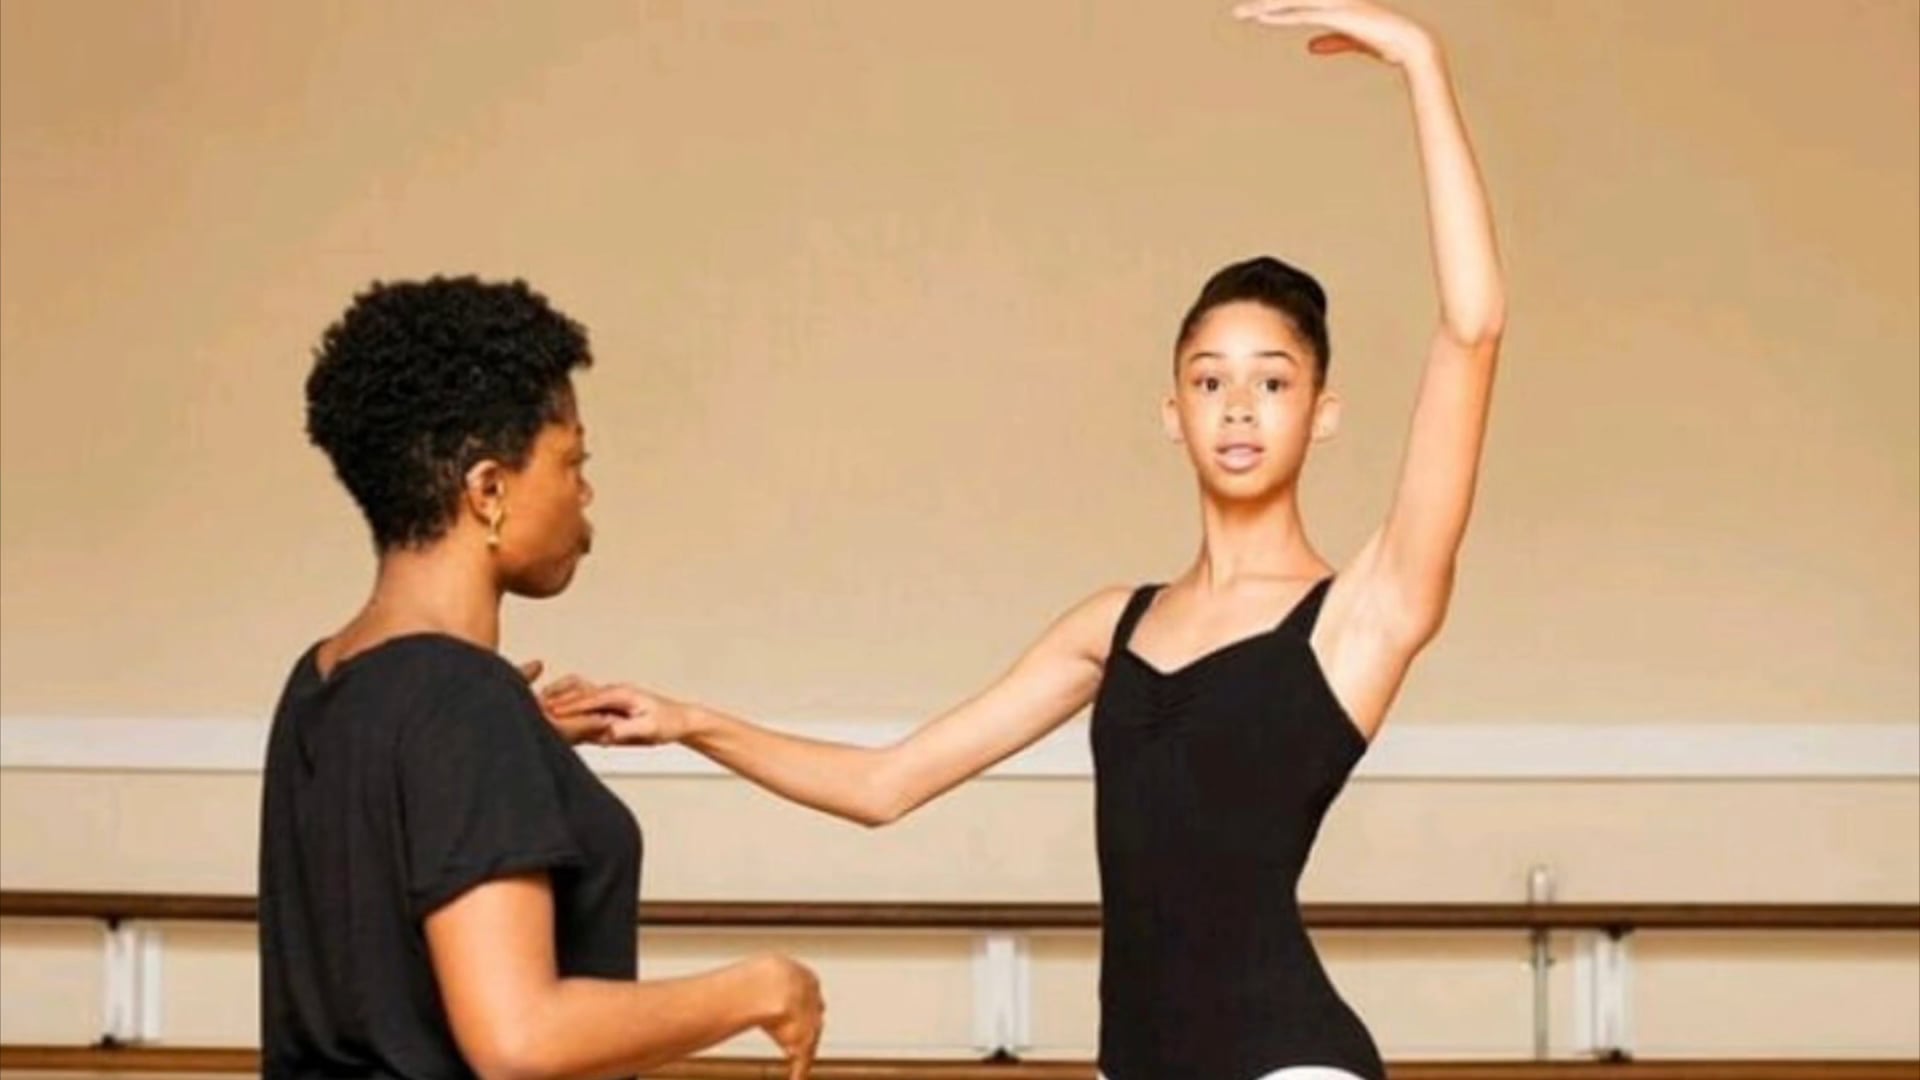 Get to know New Orleans School of Ballet